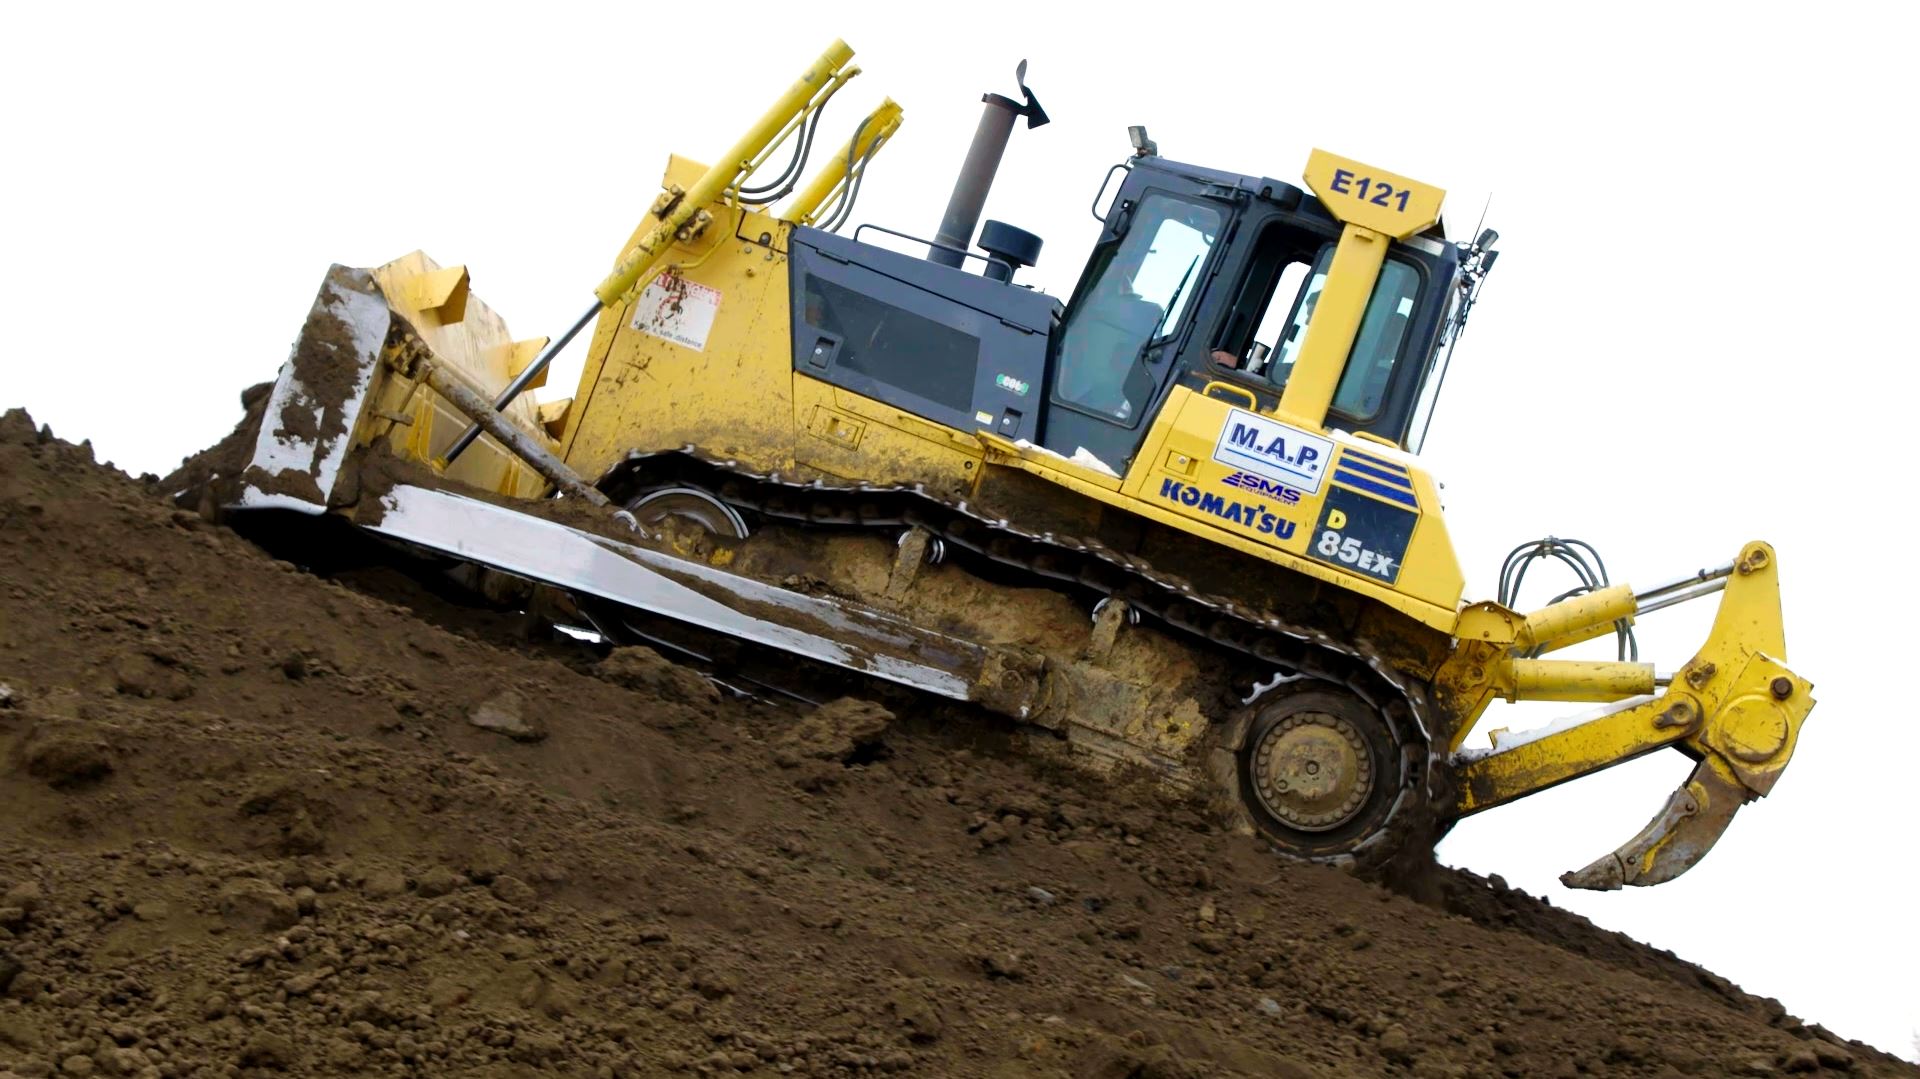 When Edmonton-based M.A.P. Group of Companies (M.A.P.) first purchased a Komatsu D65 dozer from SMS Equipment in 2005, like any astute buyer they based the decision on several factors